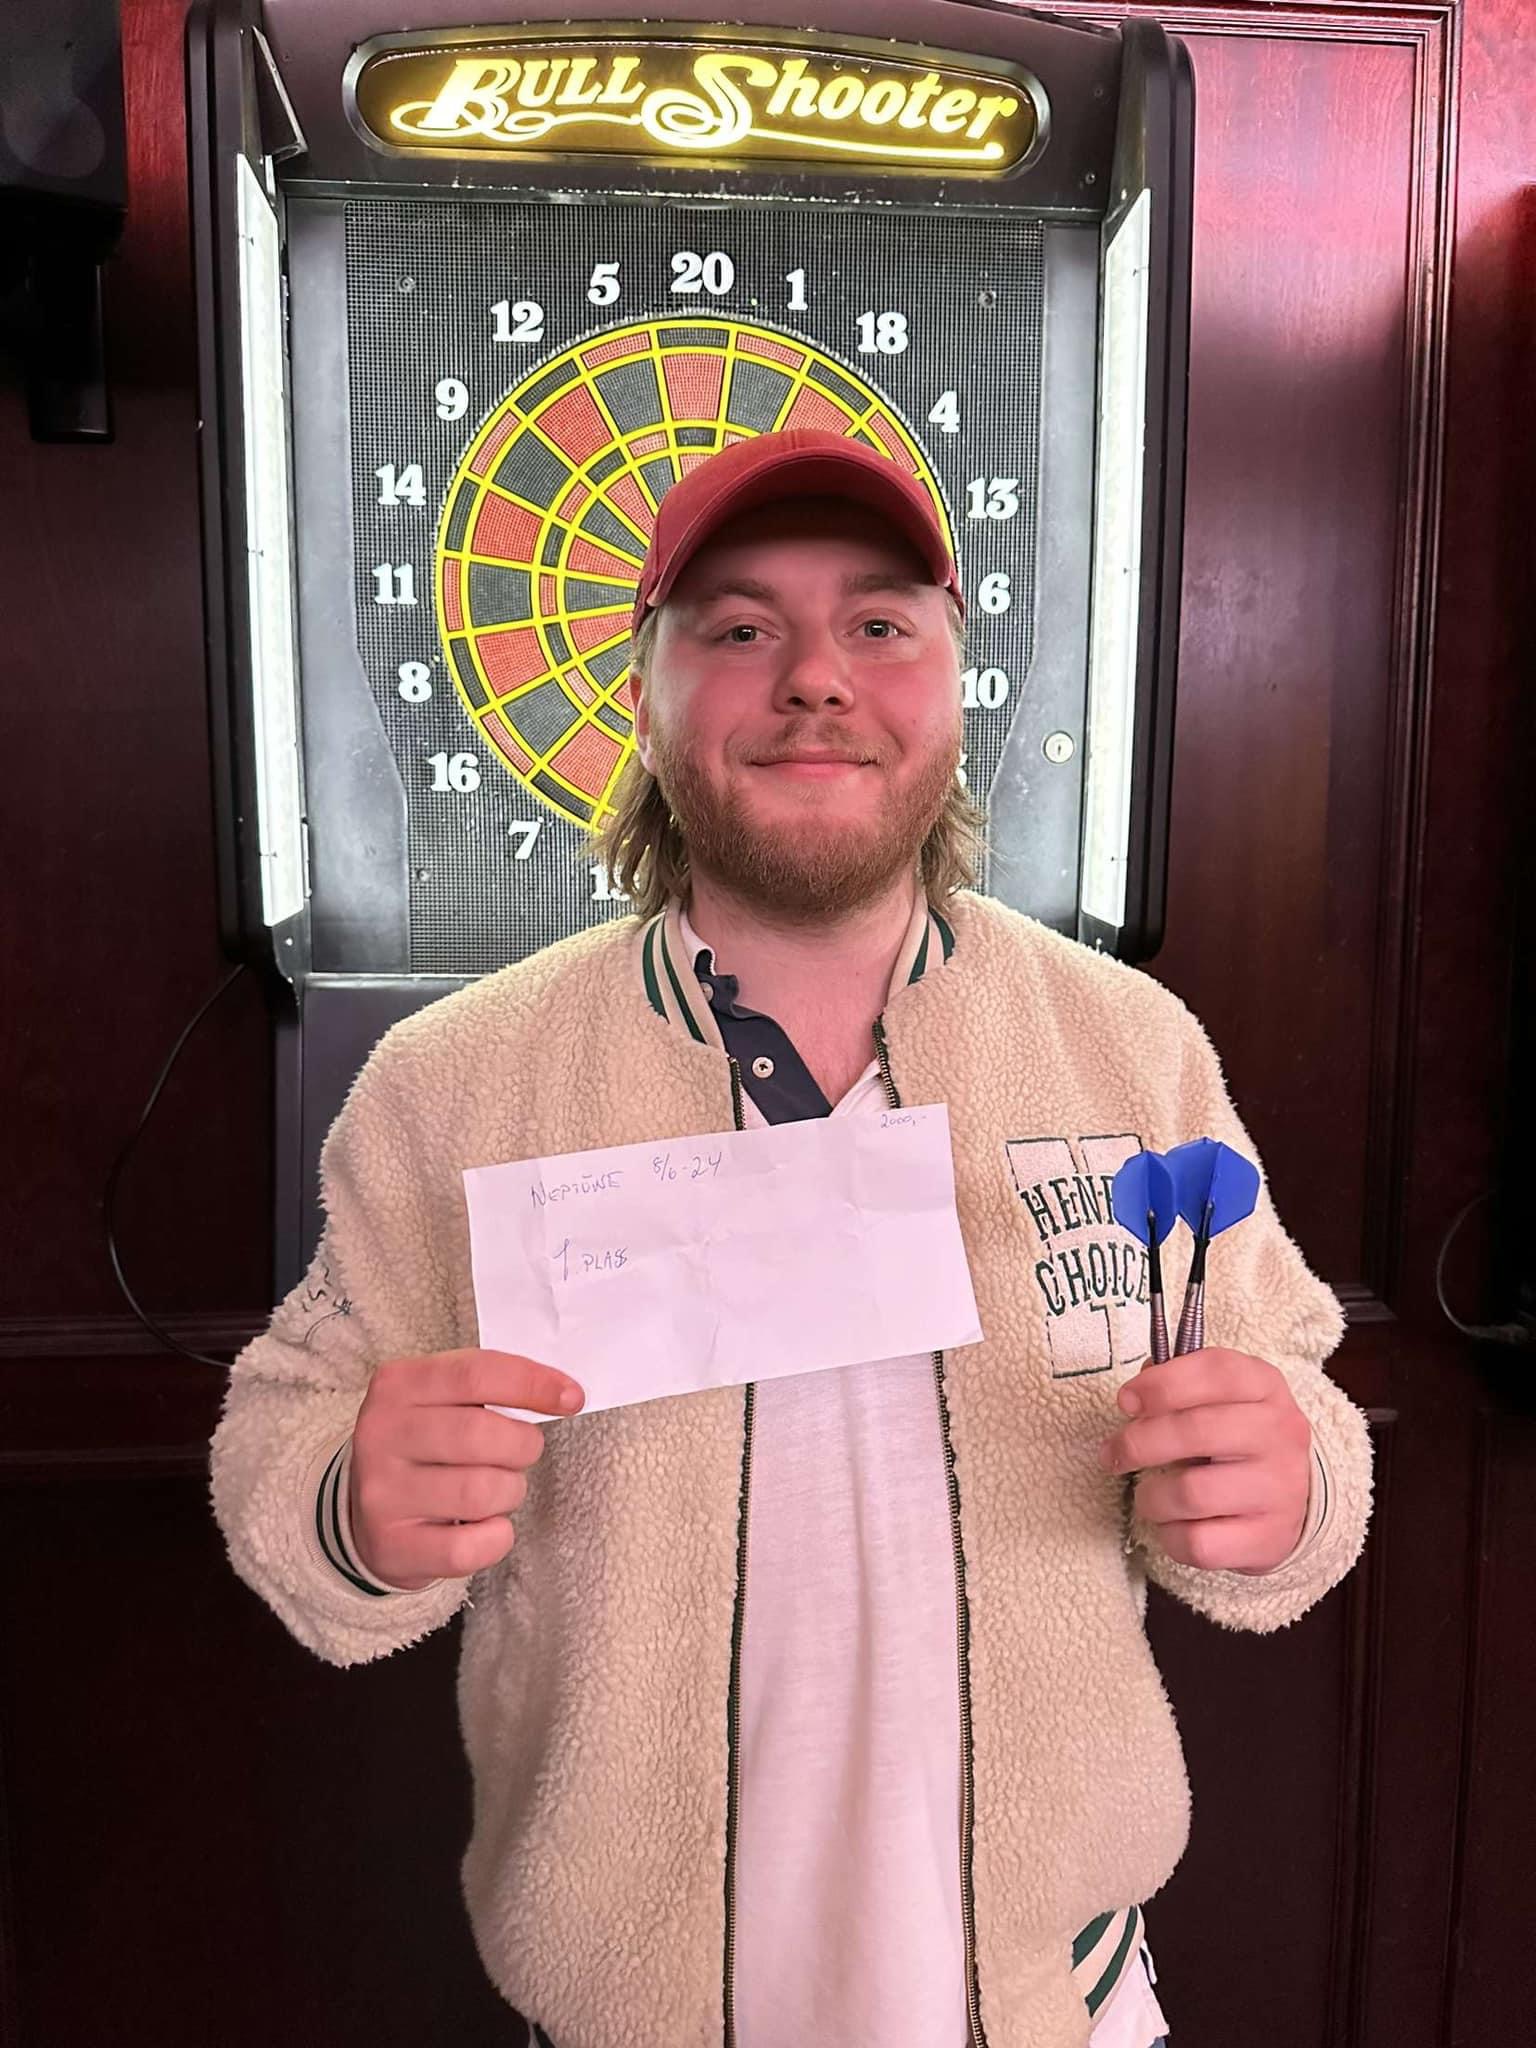 Børge Helling is a dedicated darts player